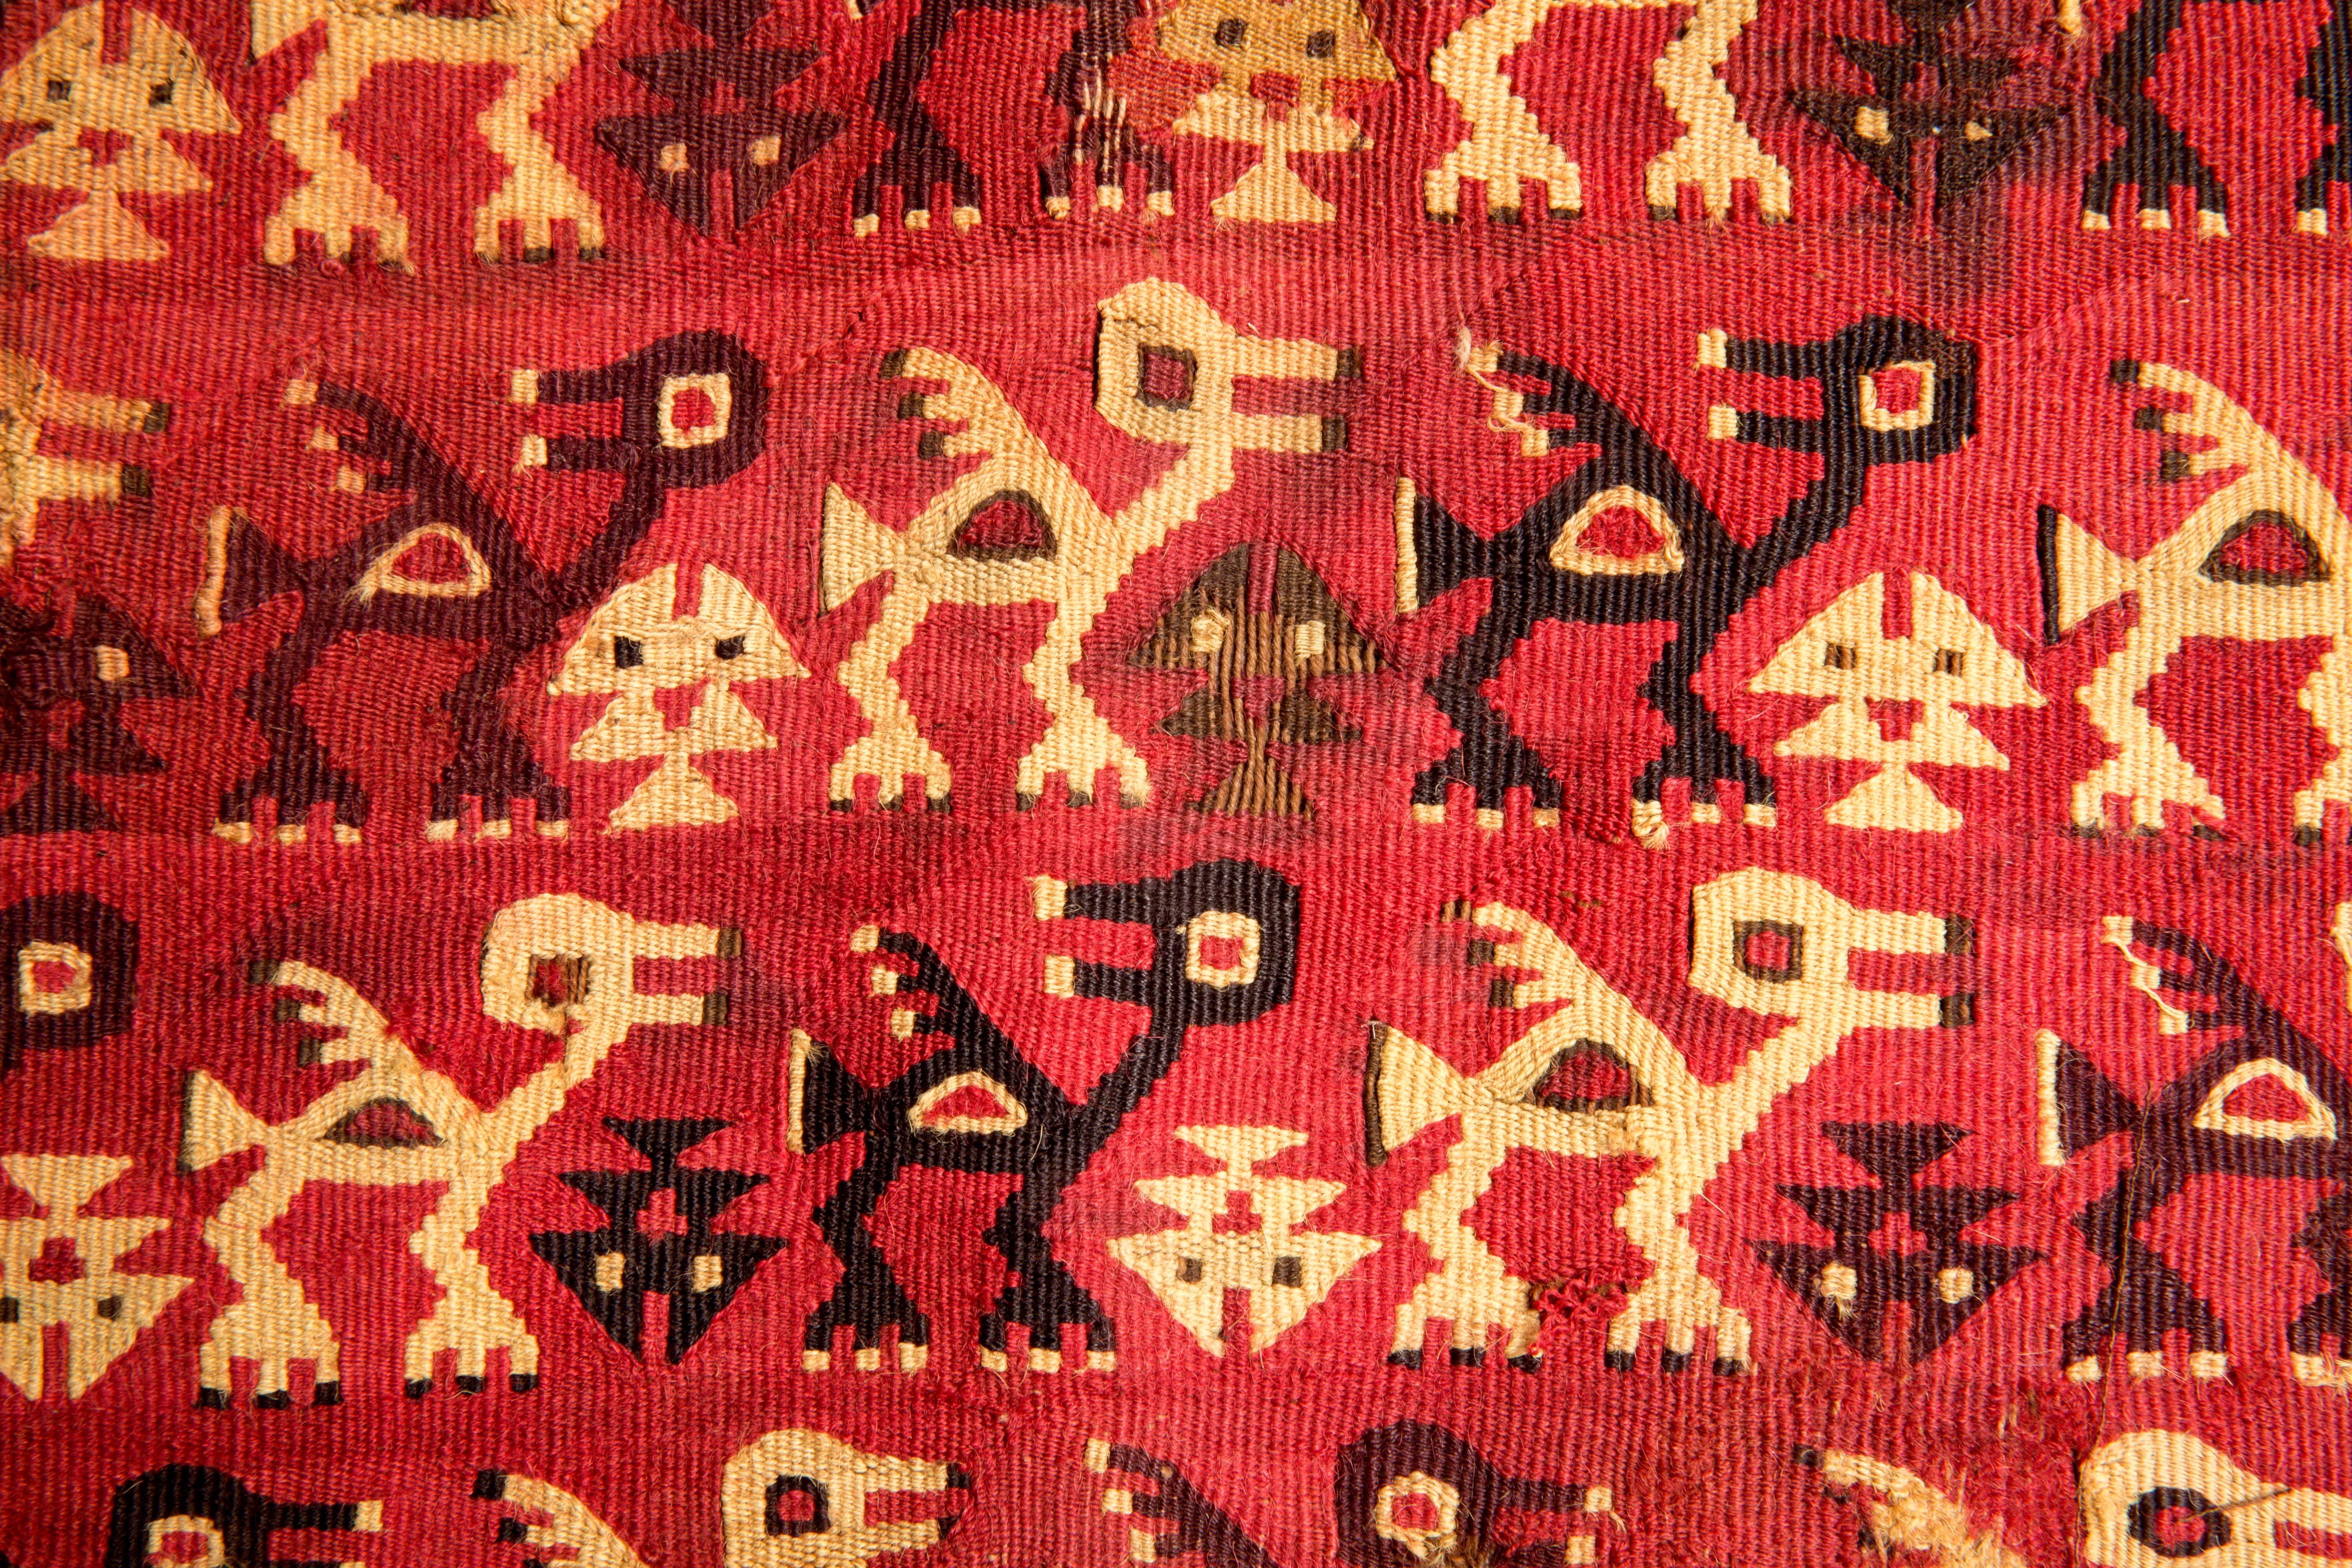 Magnificent Pre-Columbian multi-color Chancay textile with animal figures in cubist form.

The Chancay are known more for their textiles than for their ceramics. Textiles from elite Chancay tombs include elaborate gauzes, embroidery, painted plain